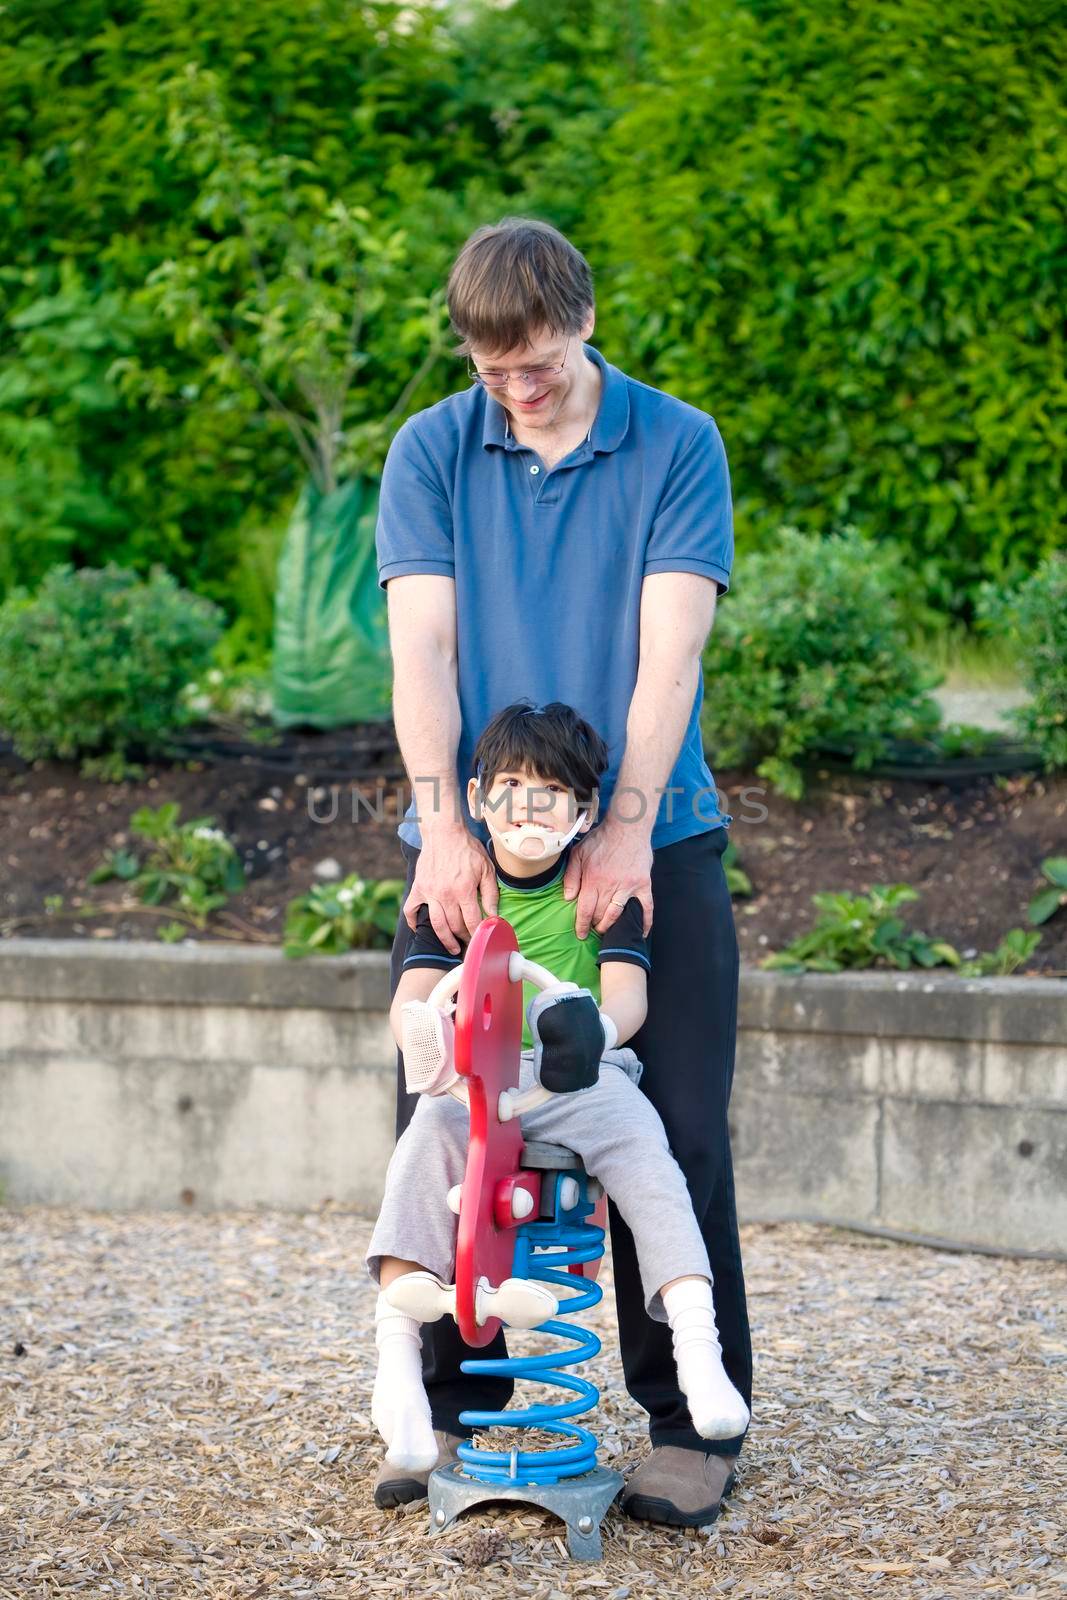 Father helping disabled son play on playground equipment